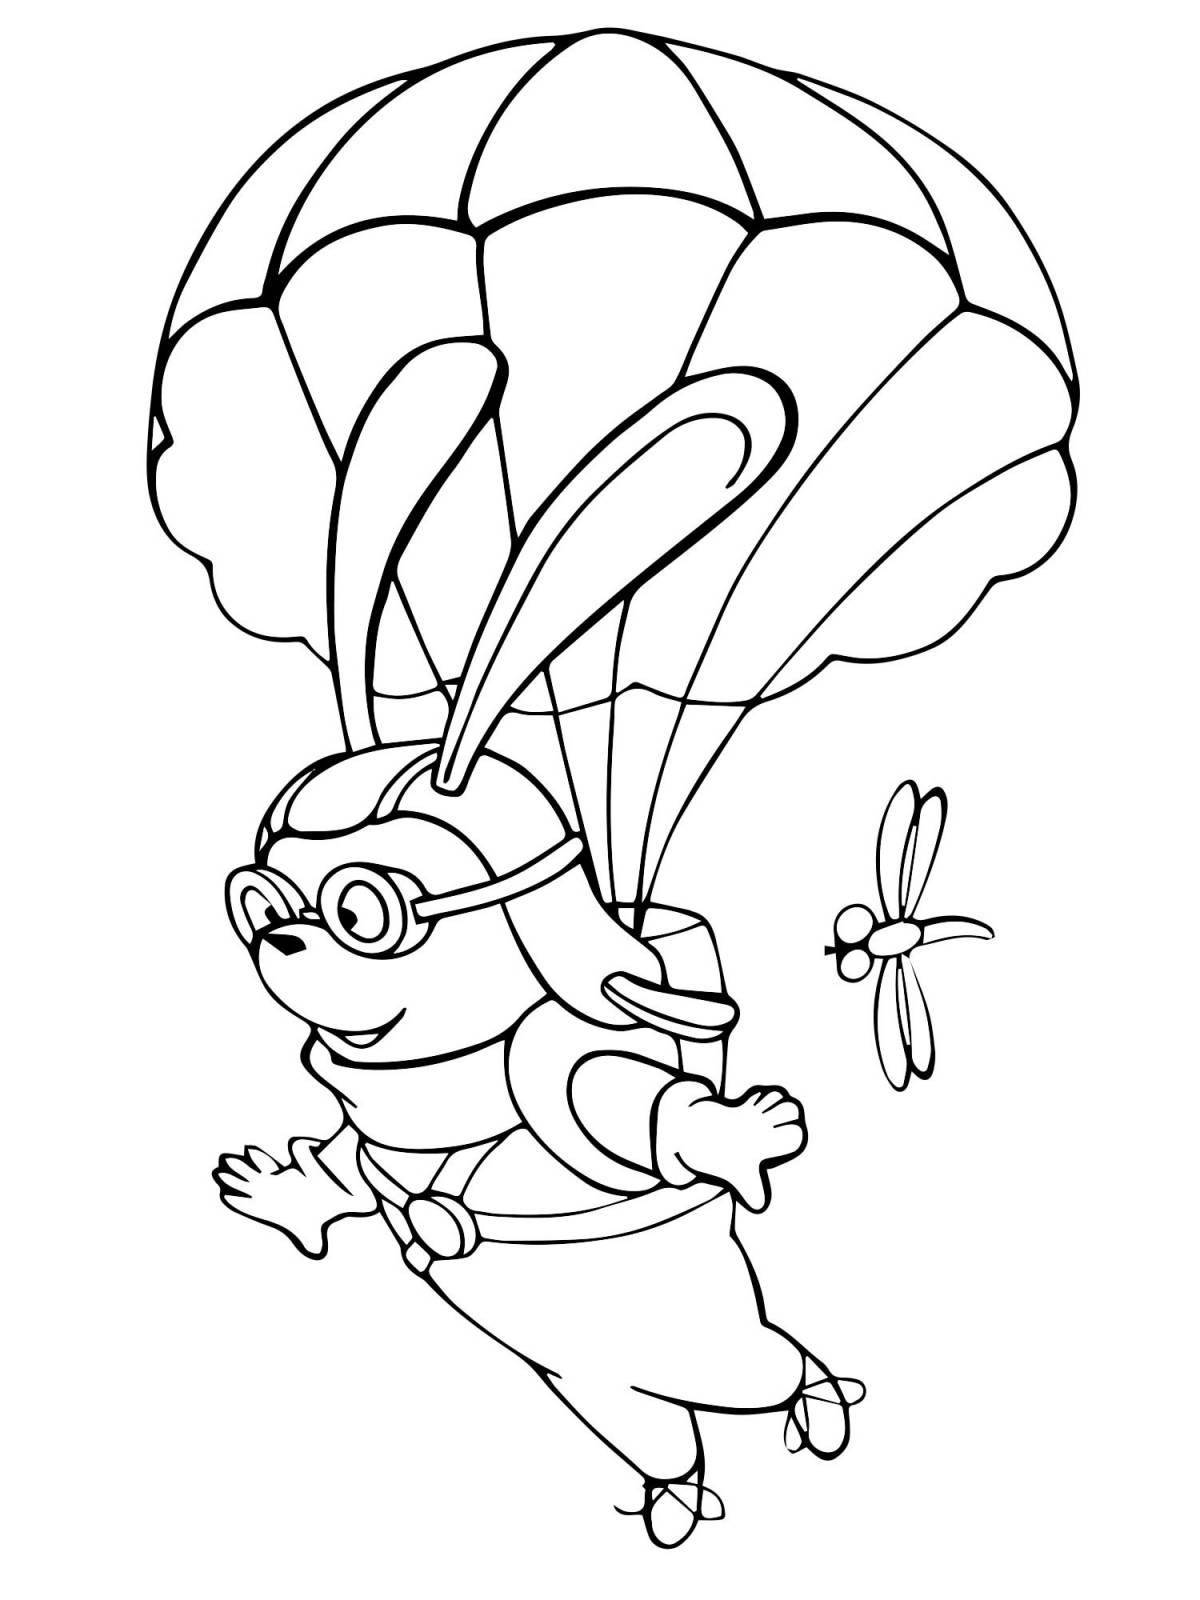 Children's skydiver coloring book for kids